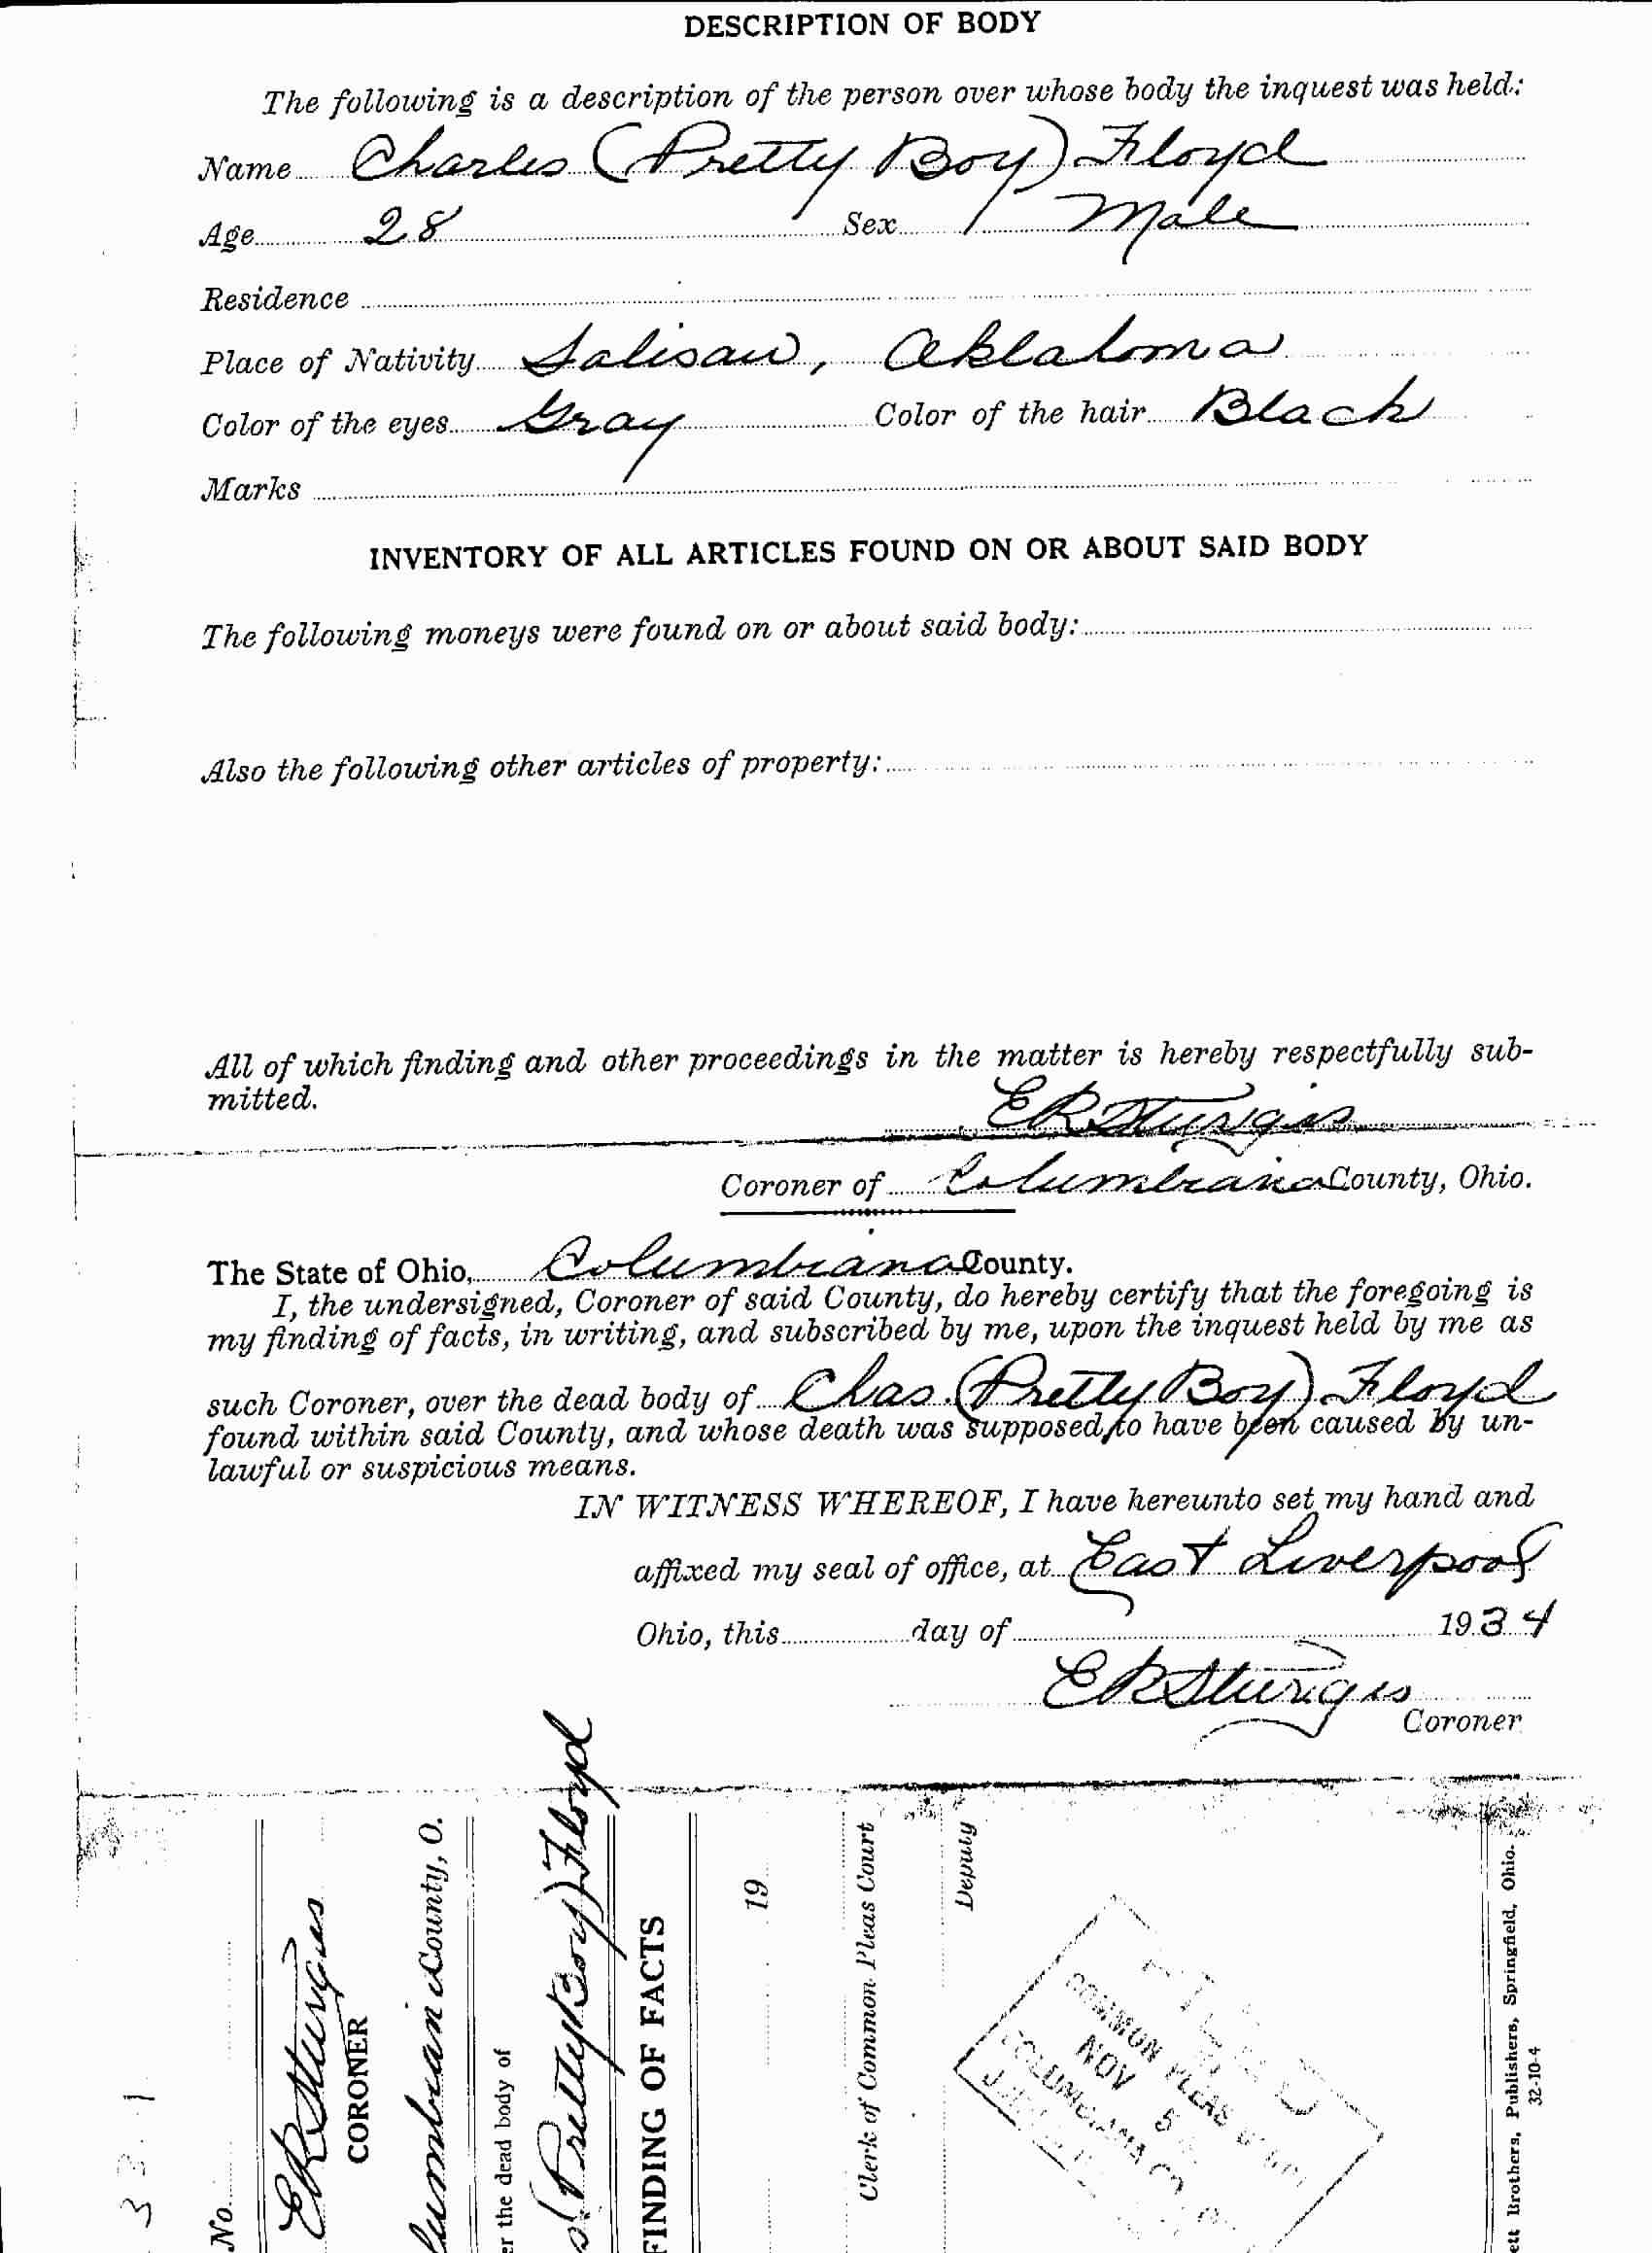 Page 1 of the Coroner's report